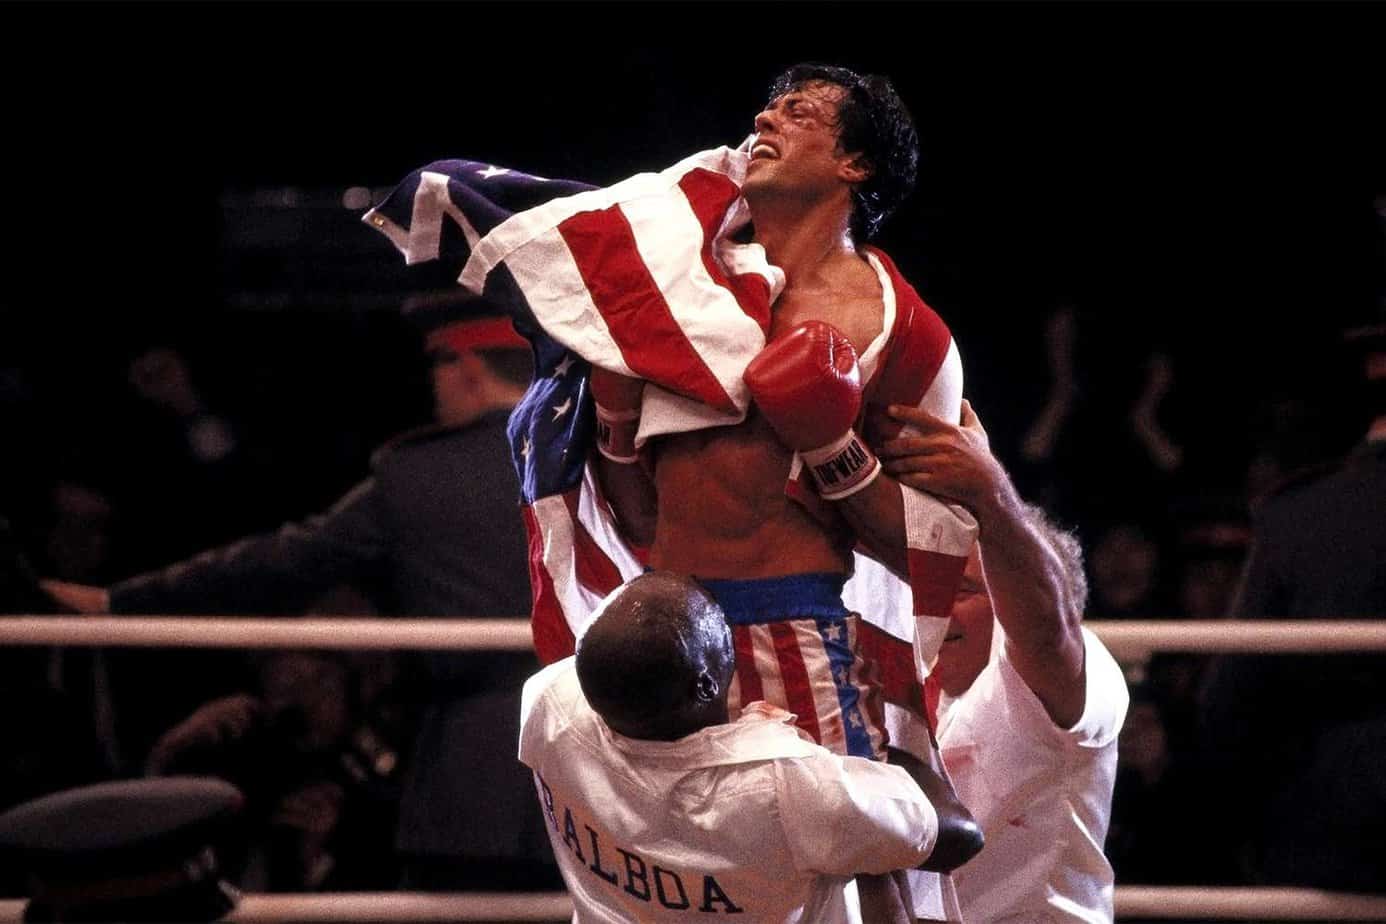 rocky movies to watch before creed III. Rocky 4 finale boxer wrapped in a US flag held up by two people.